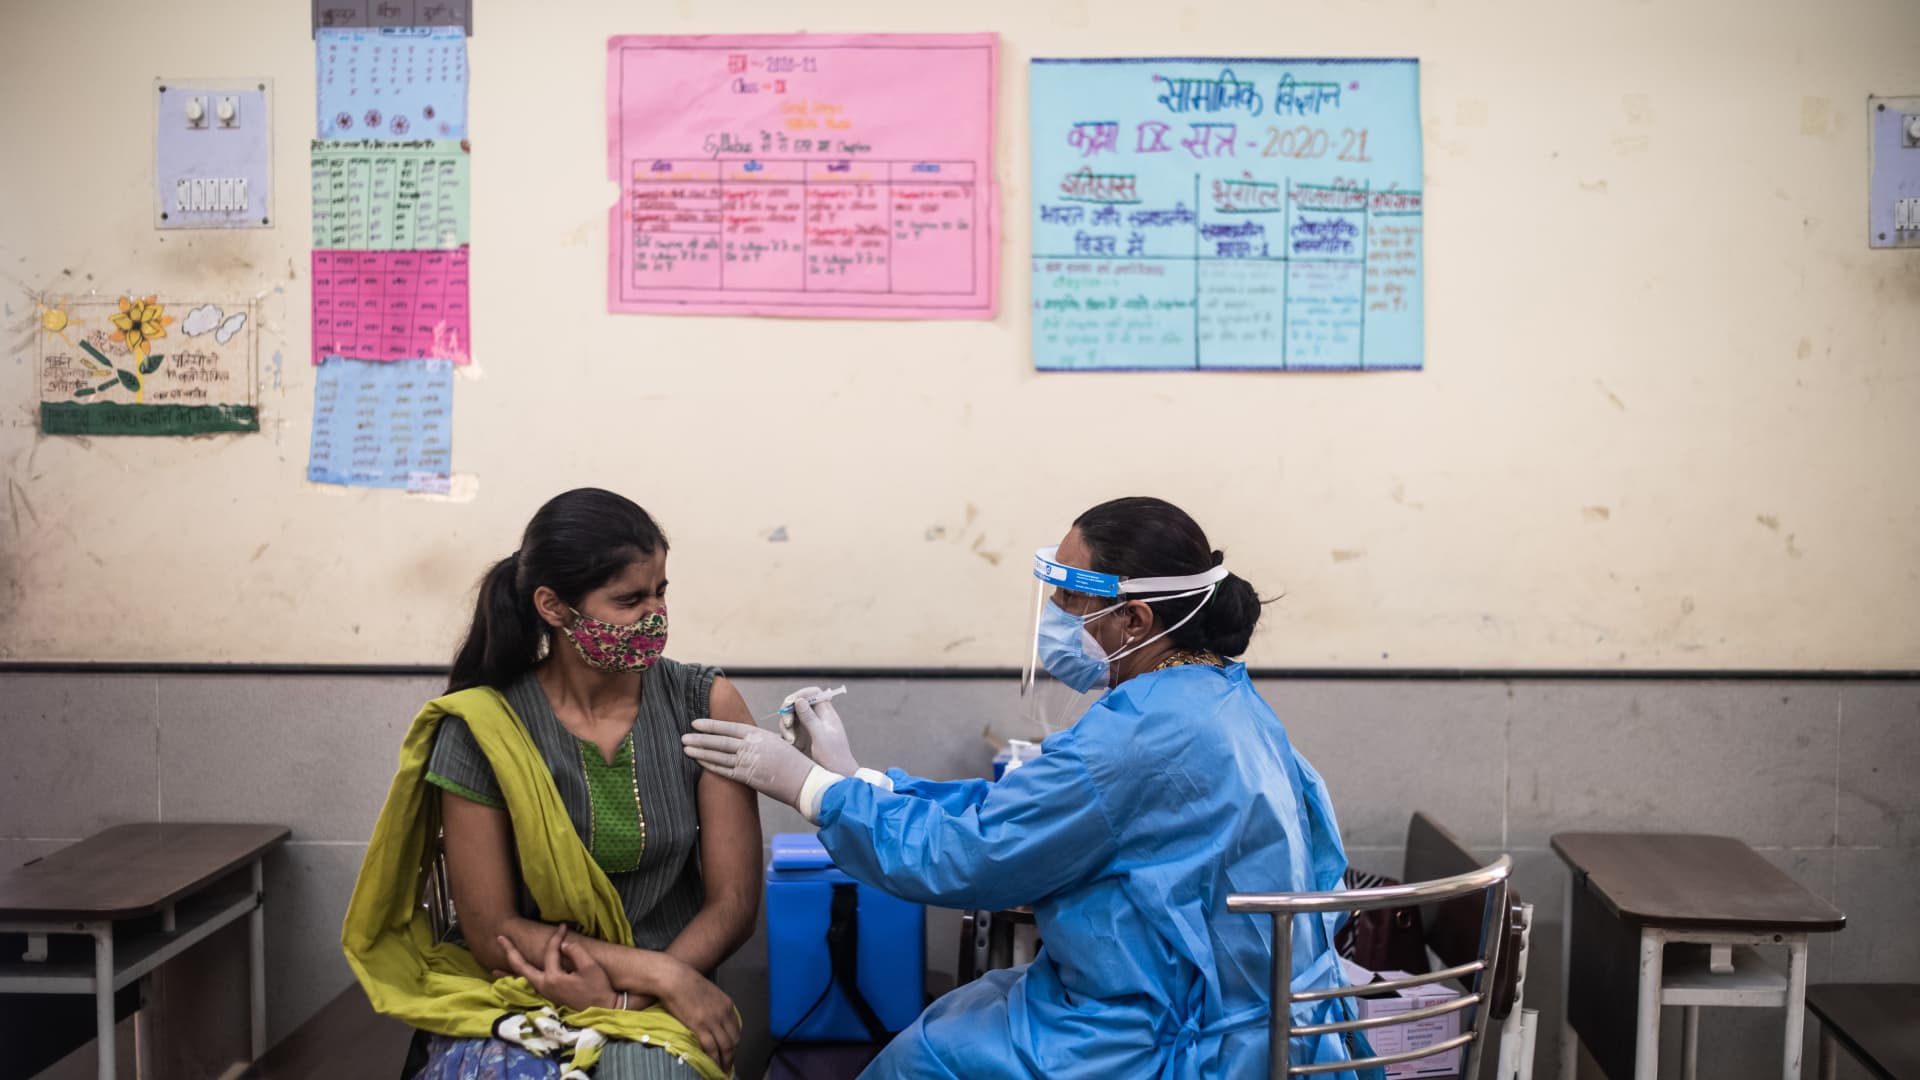 People receive their Covid-19 vaccines from medical workers at a vaccination centre set up in the classroom of a government school on May 04, 2021 in New Delhi, India.